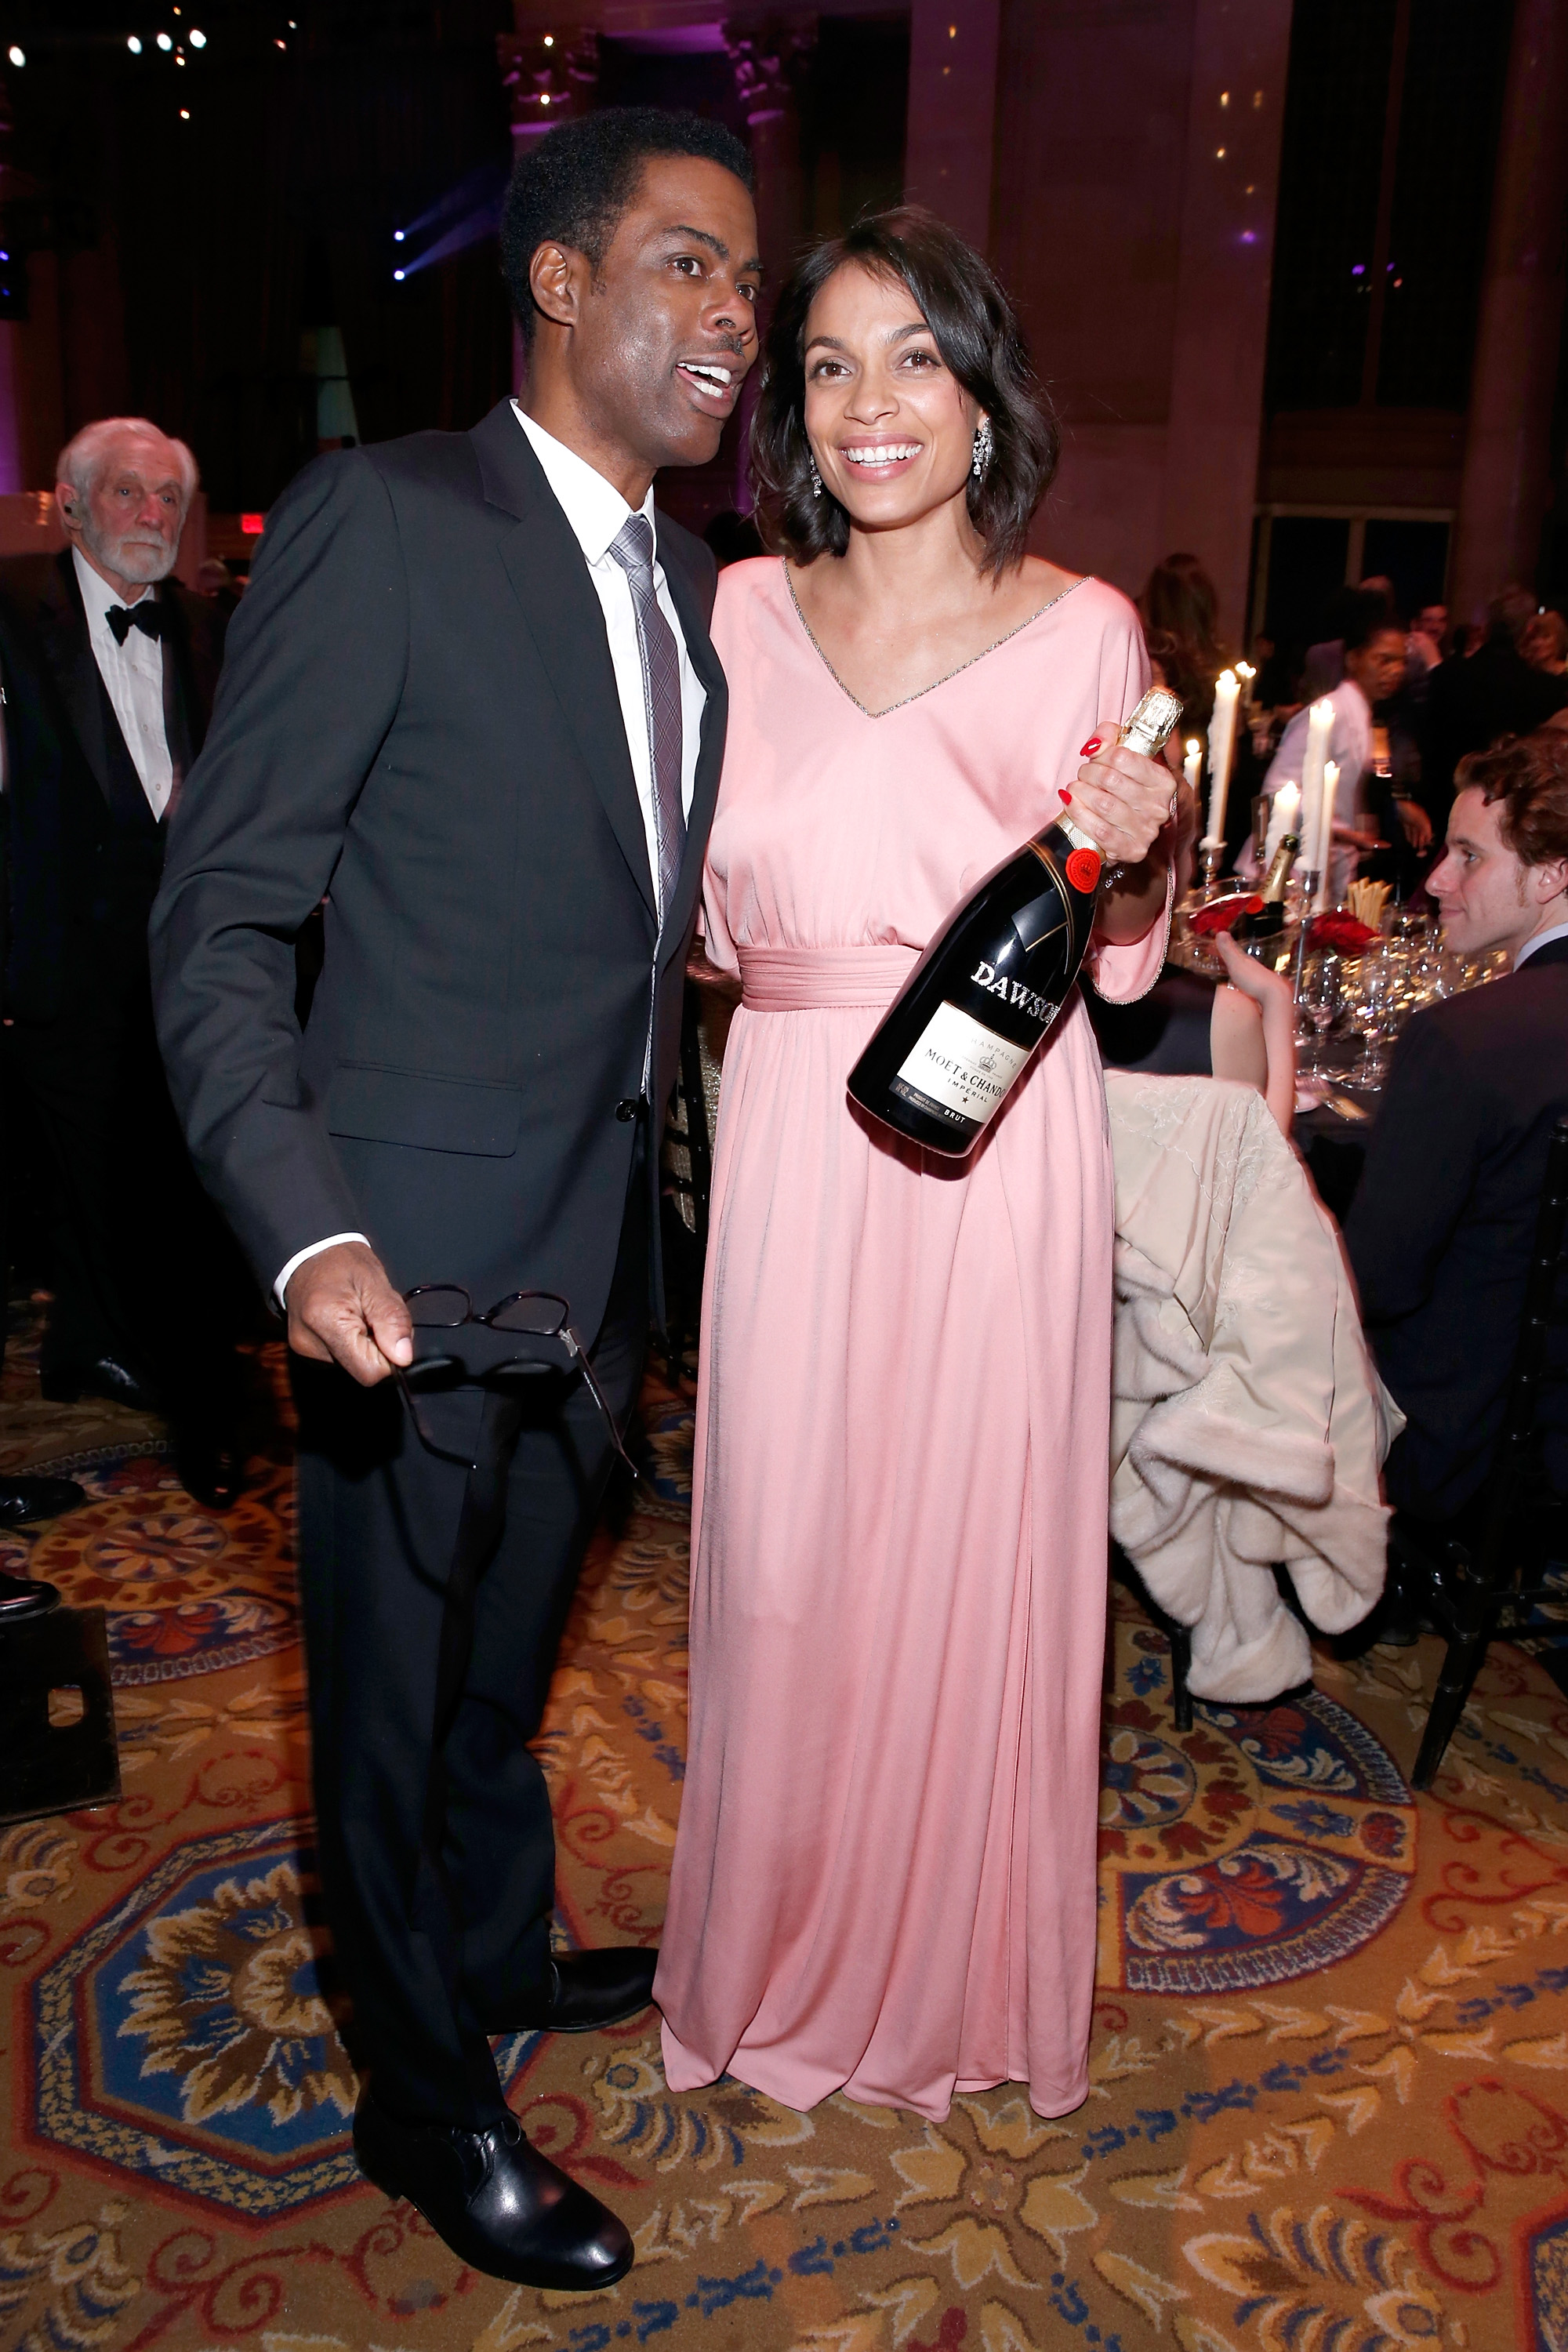 Comedian Chris Rock (L) and actress Rosario Dawson attend the Moet & Chandon toast to the amfAR Gala at Cipriani Wall Street